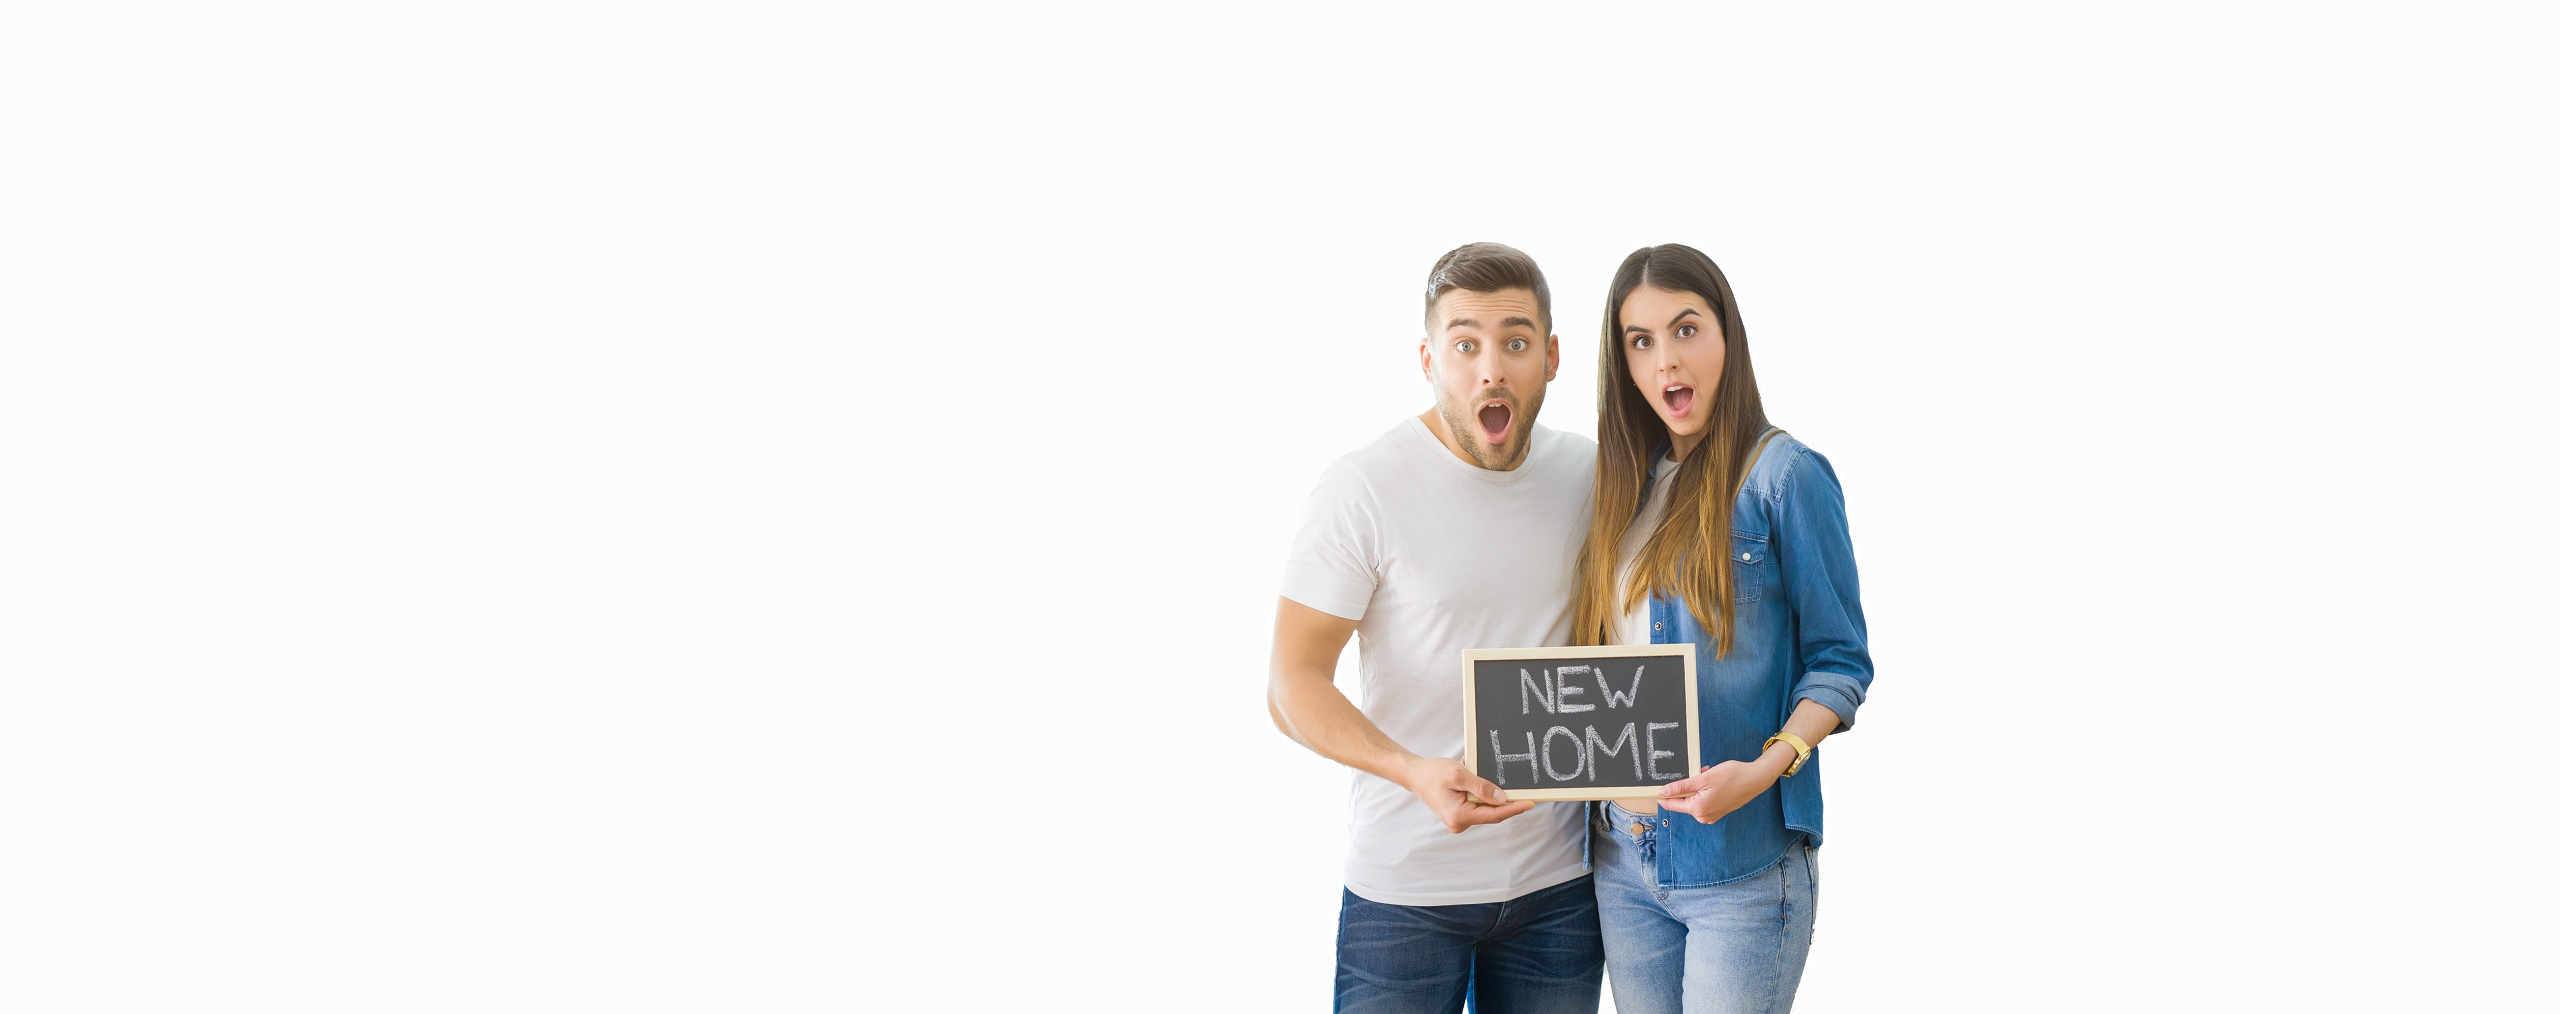 Young couple with new home sign